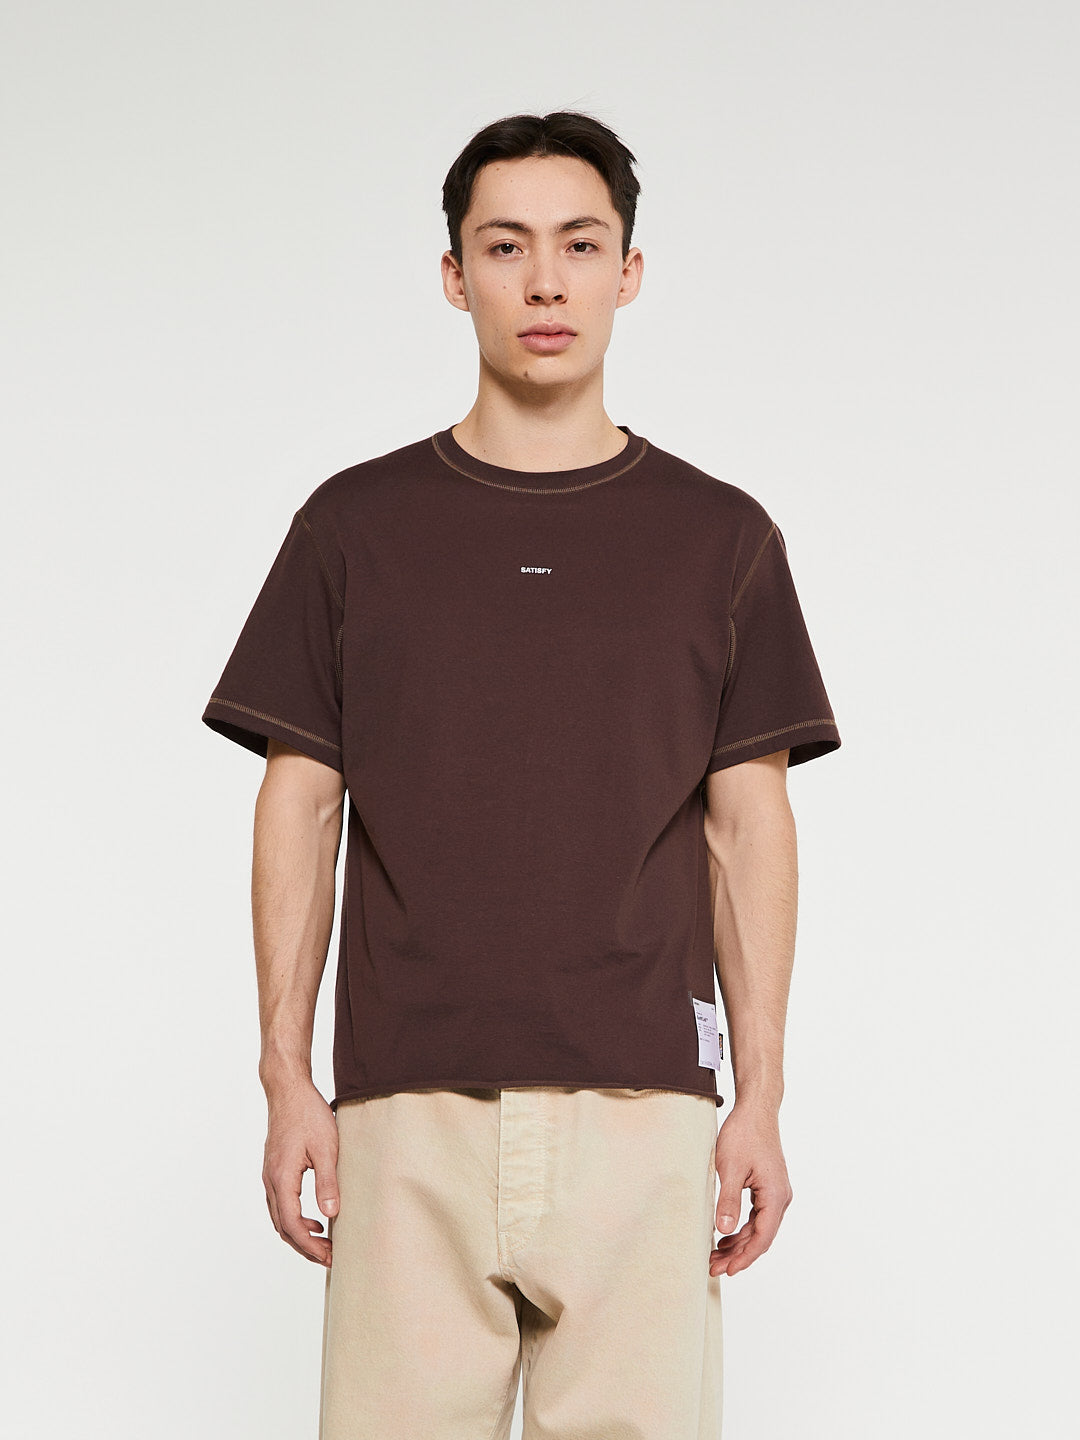 Satisfy - SoftCell Cordura Climb T-Shirt in Brown